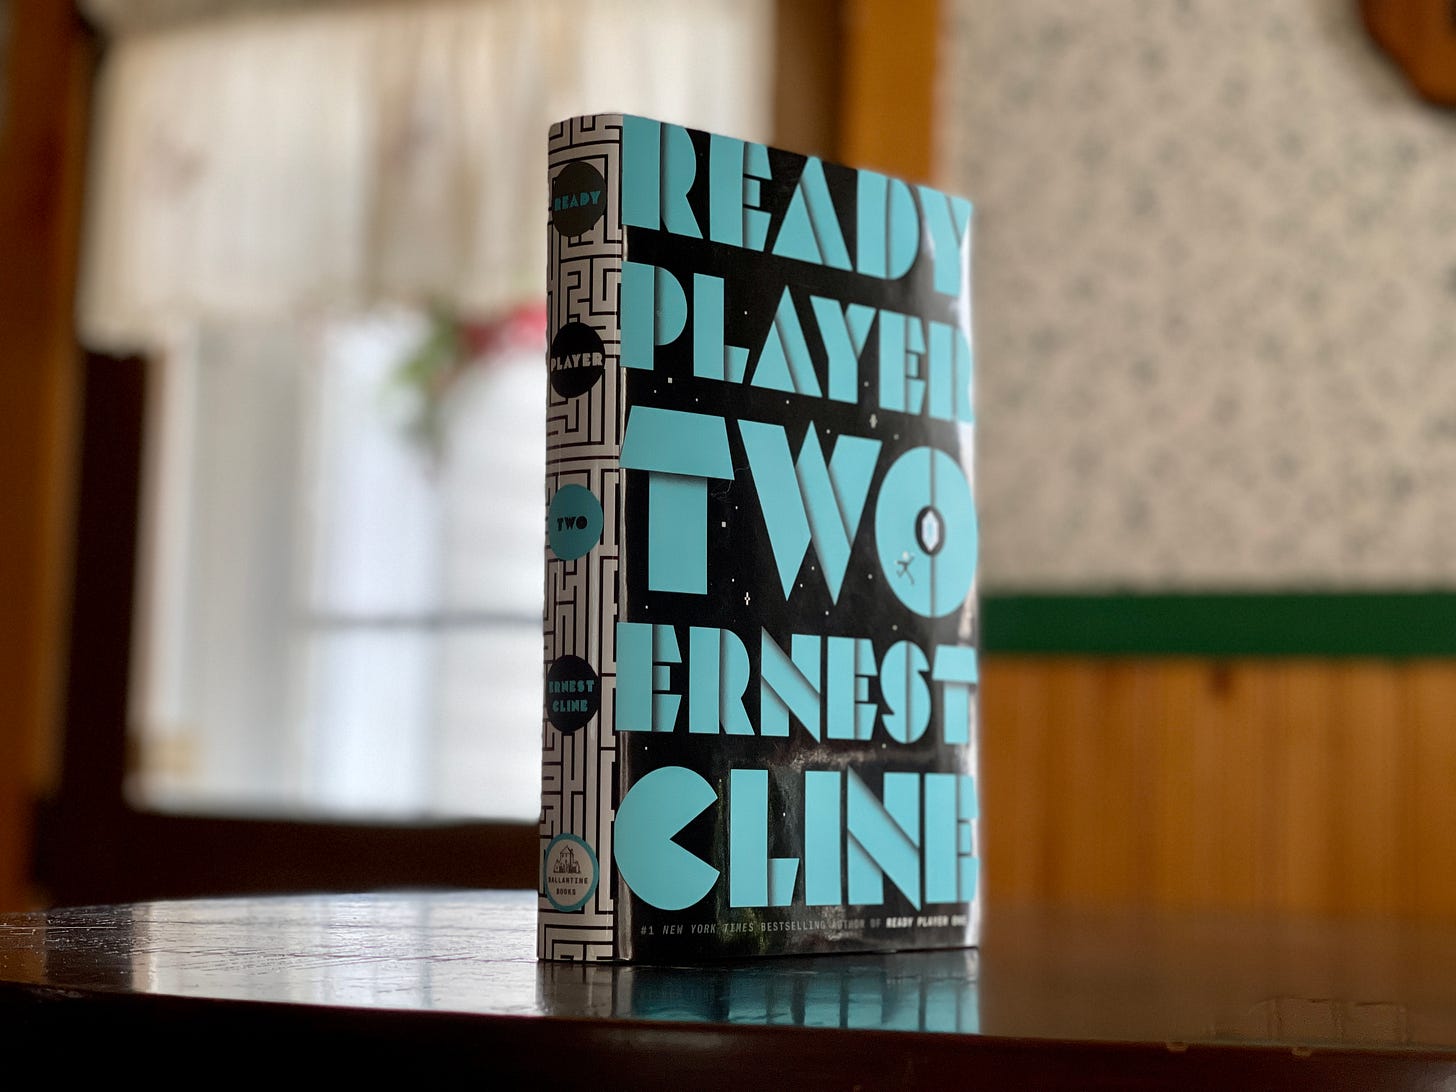 A single copy of Ready Player Two, title and author listed in light blue on a black background, stands on a kitchen table. 